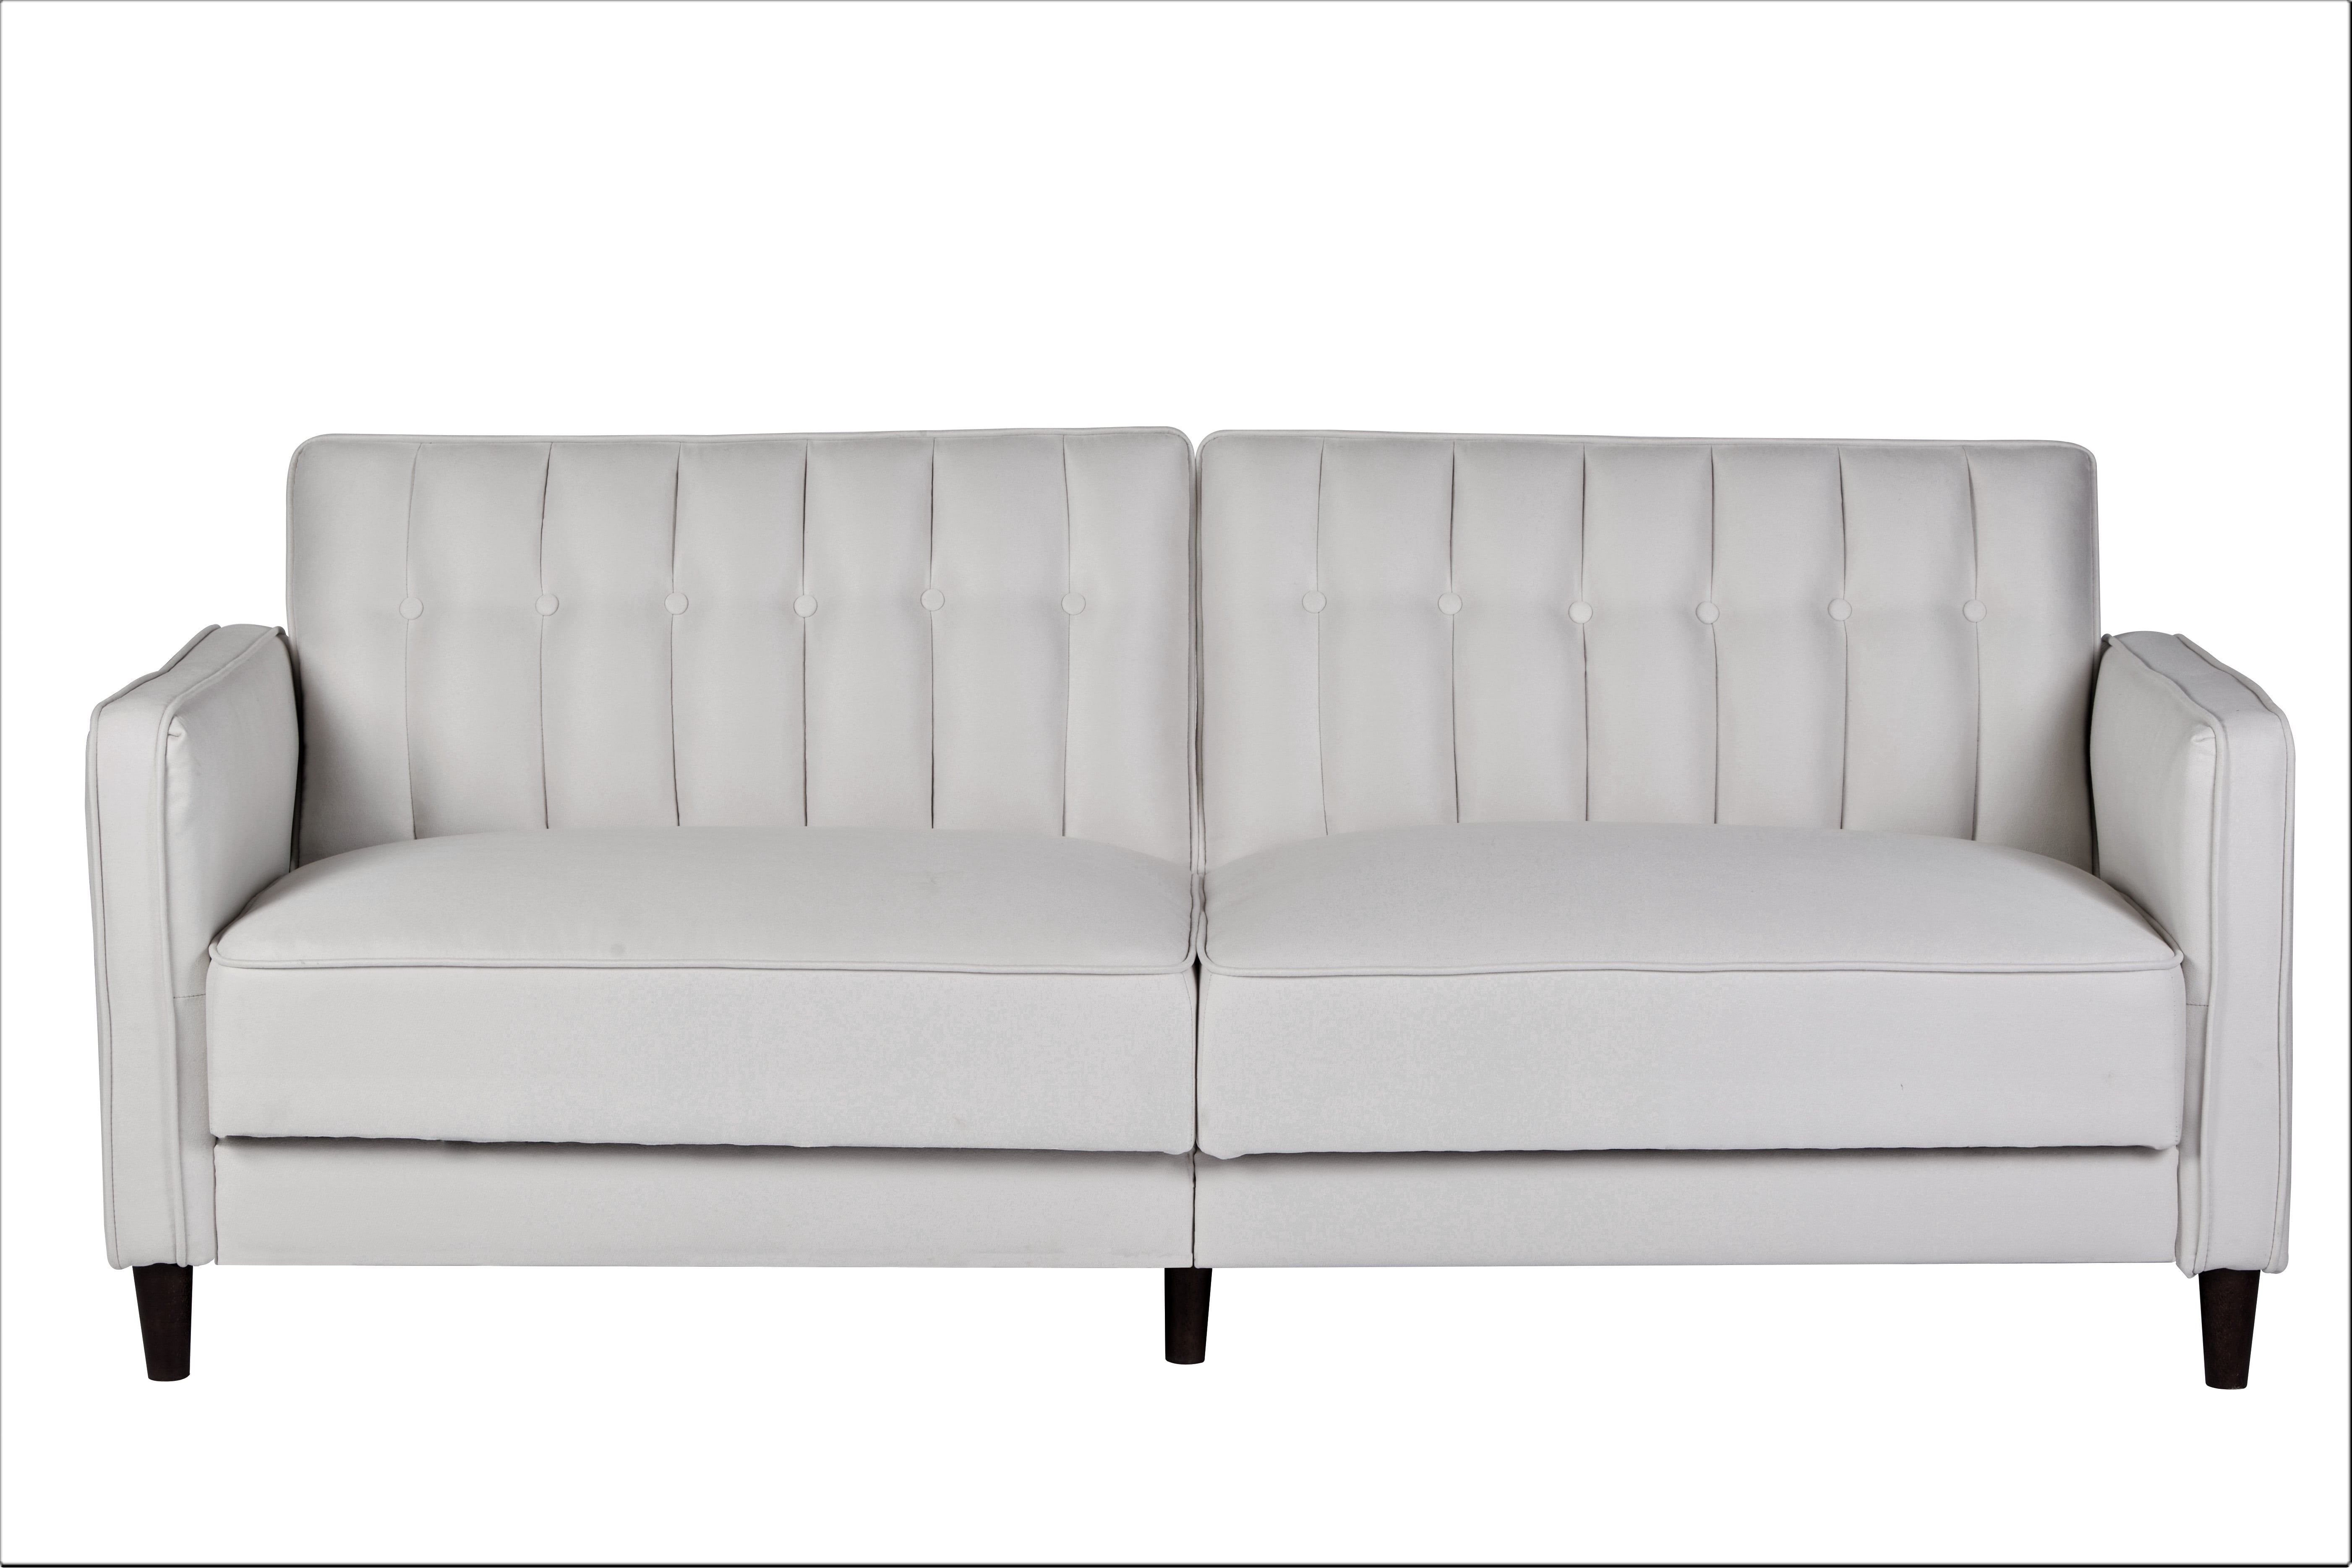 ava sofa bed urban outfitters